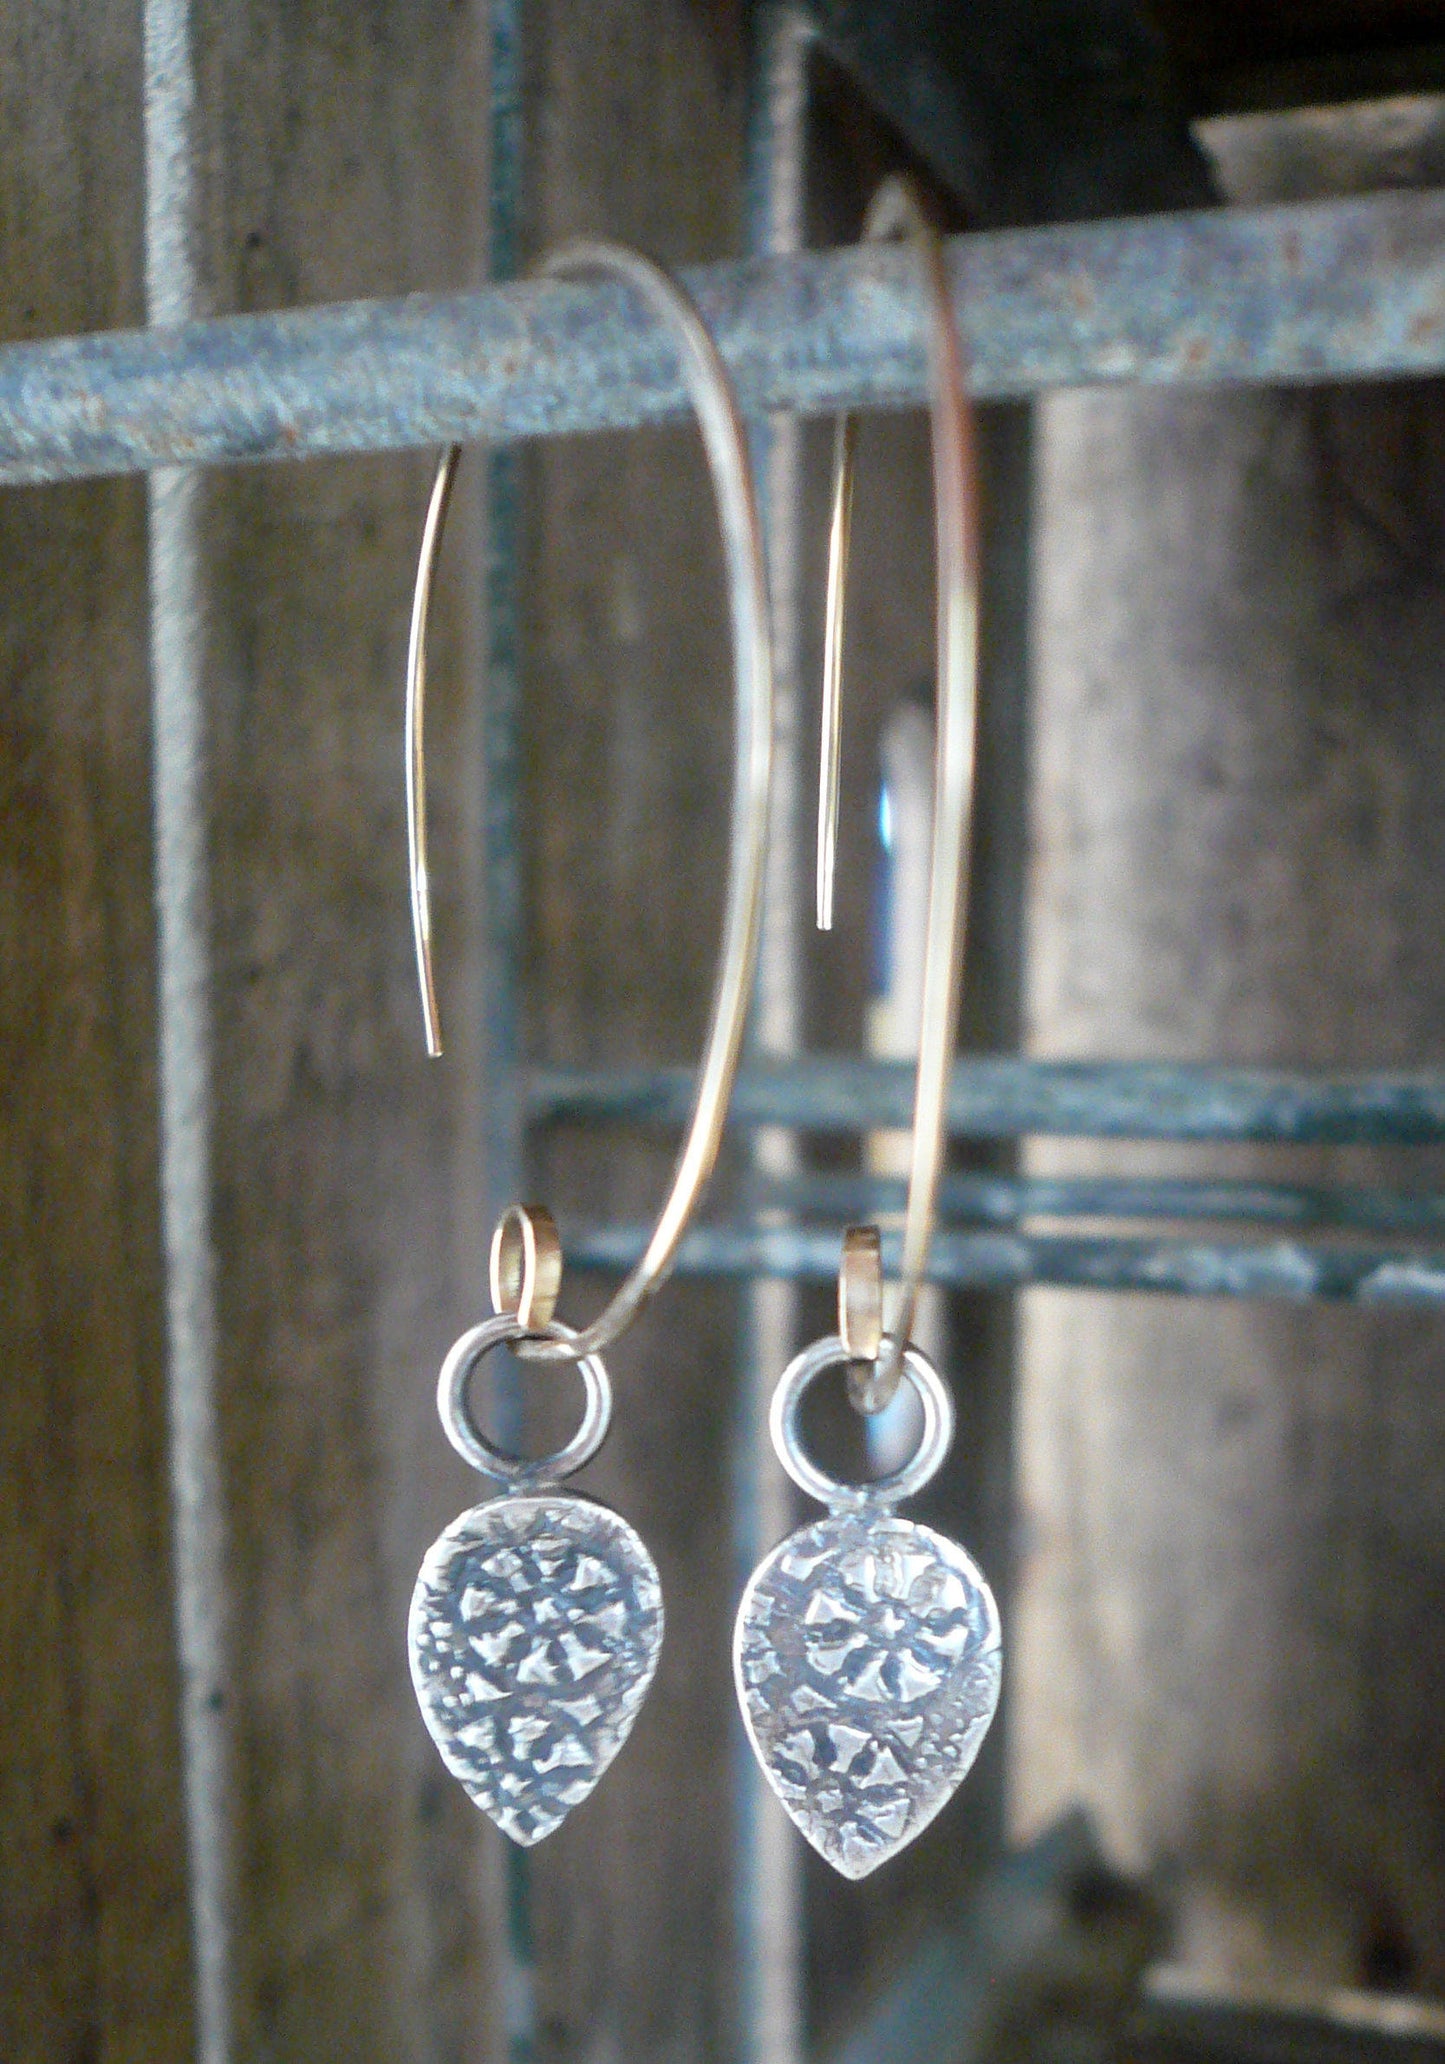 Soleil Collection Ray Earrings - Oxidized fine silver. 14kt Goldfill. Mixed Metal. Handmade